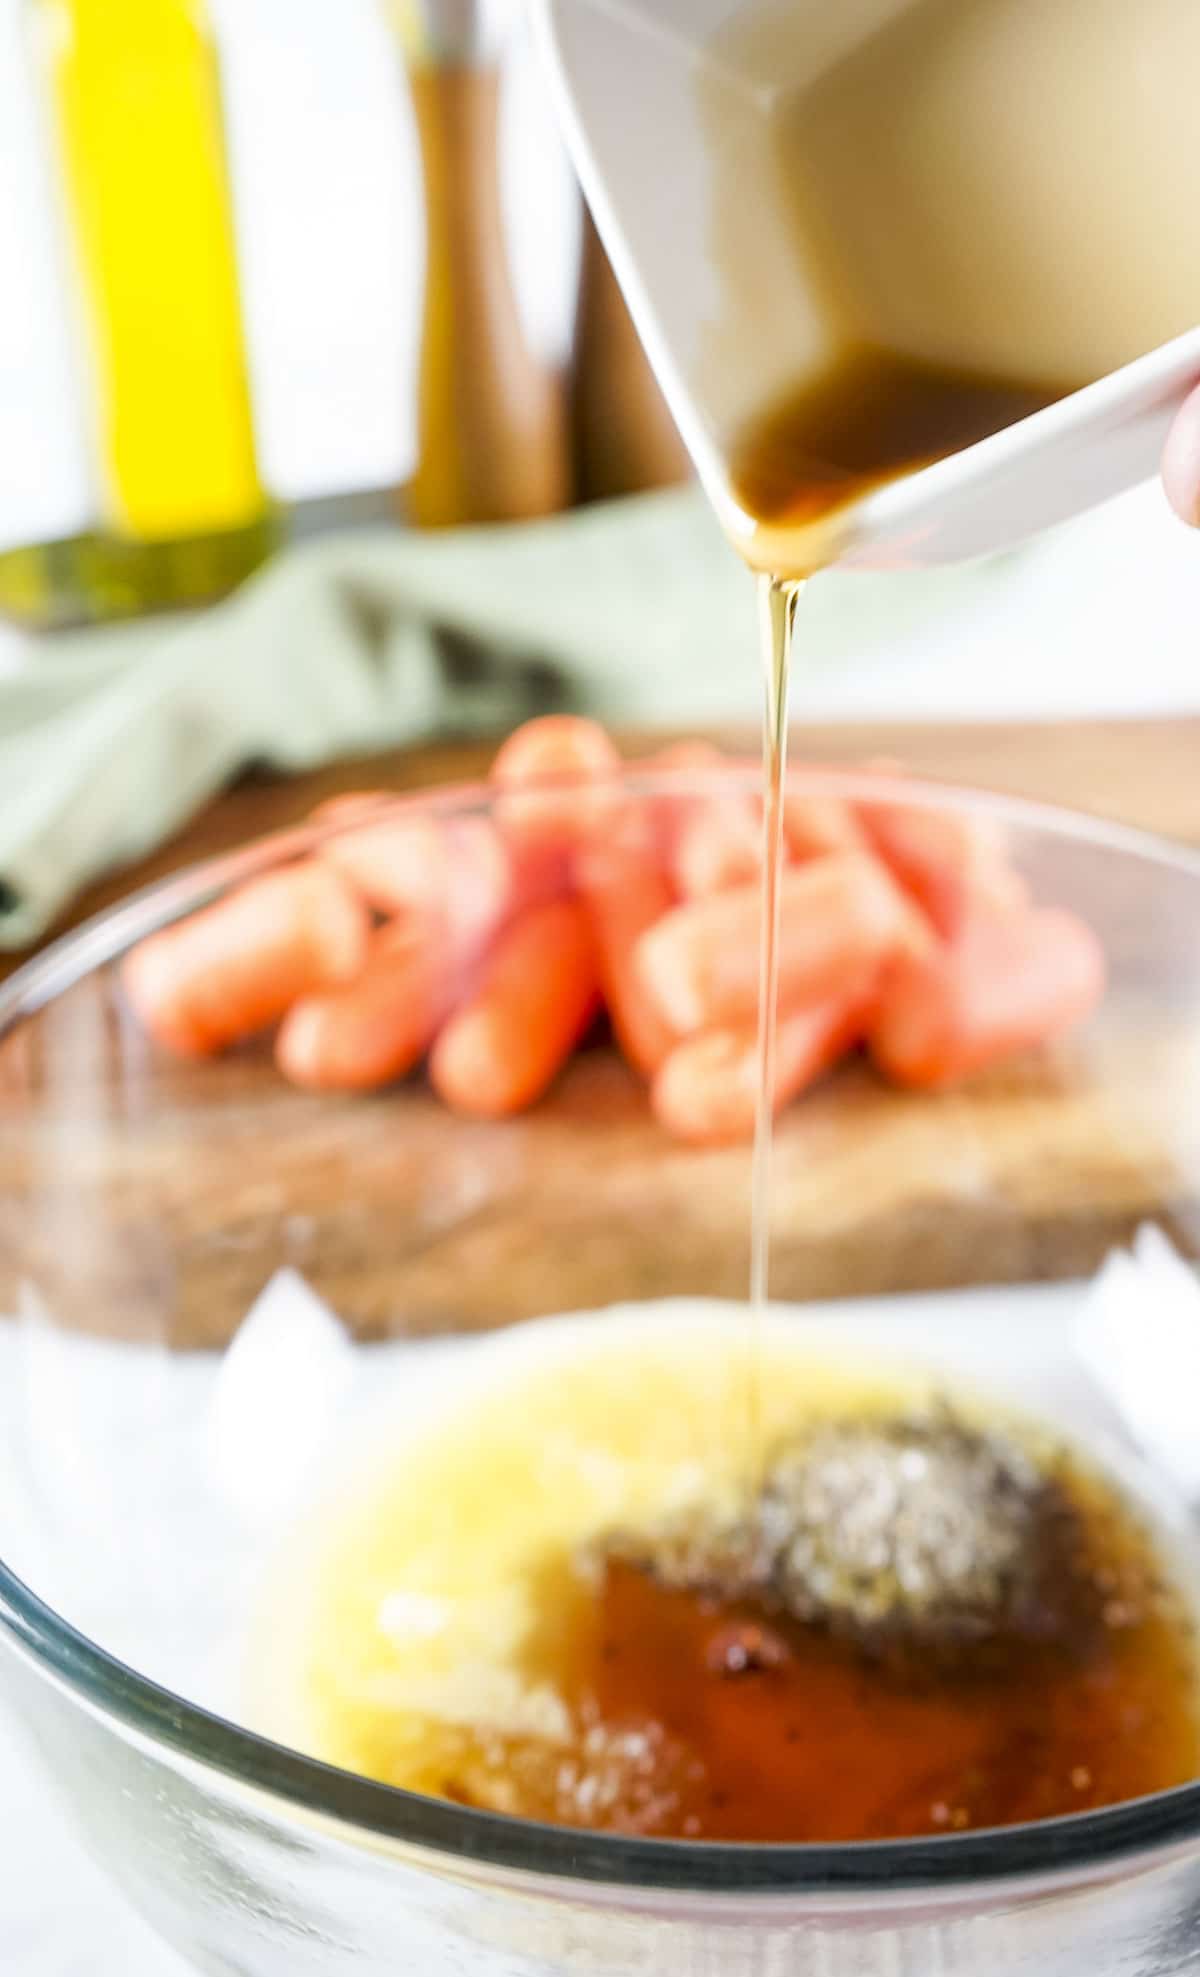 Maple syrup being poured into a bowl of melted butter and seasonings.